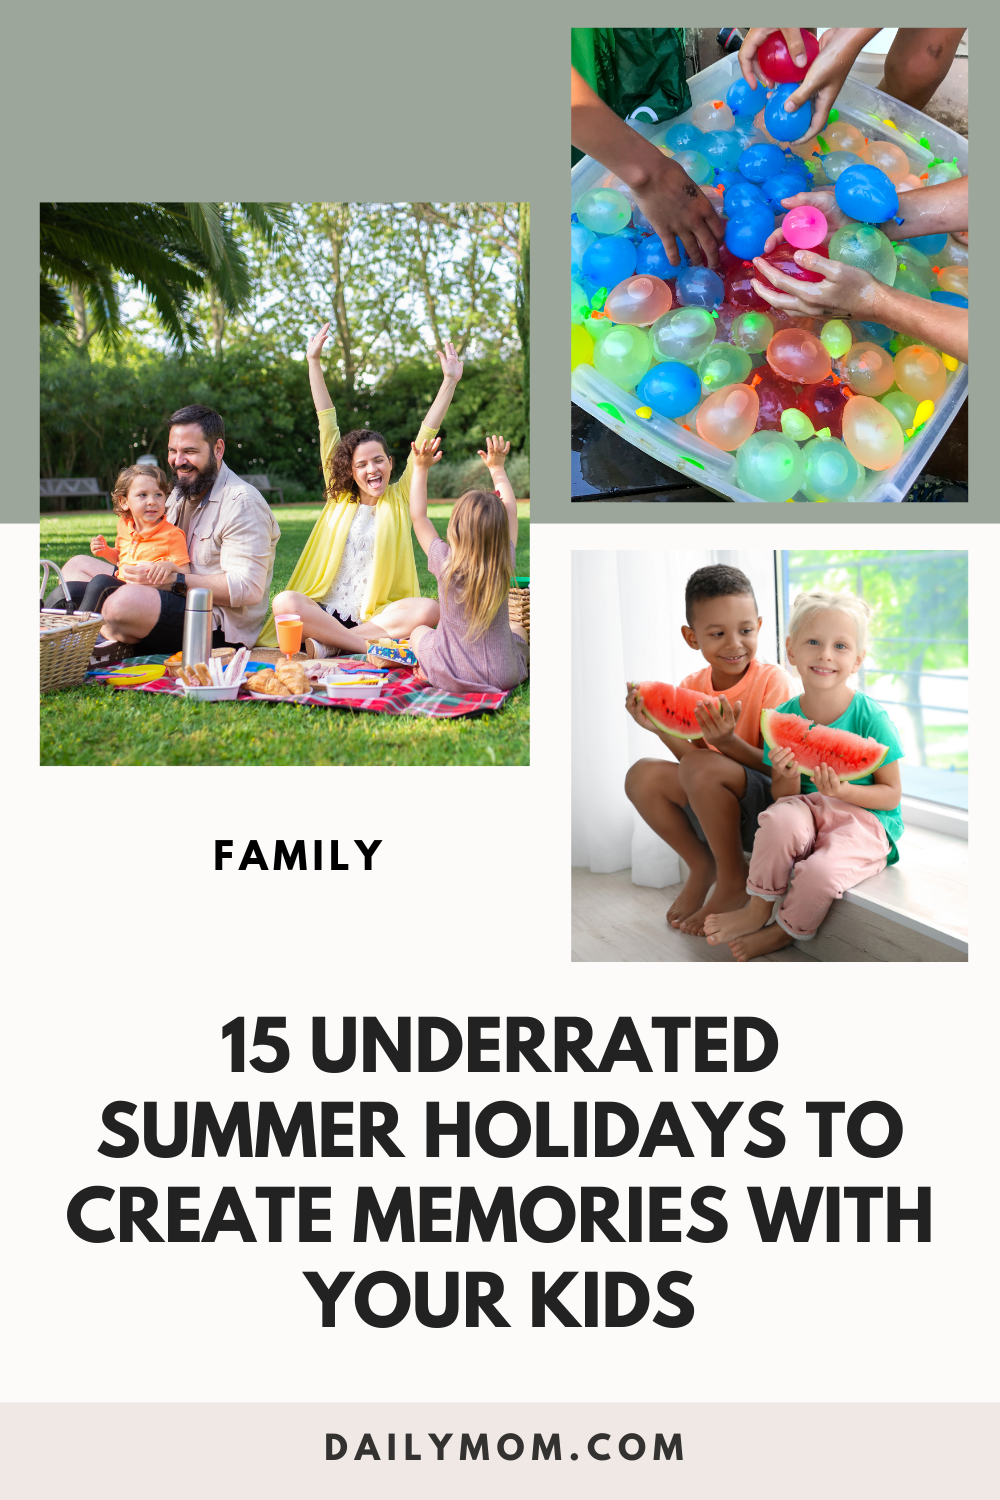 15 Underrated Summer Holidays To Create Unforgettable Memories With Your Kids 1 Daily Mom, Magazine For Families